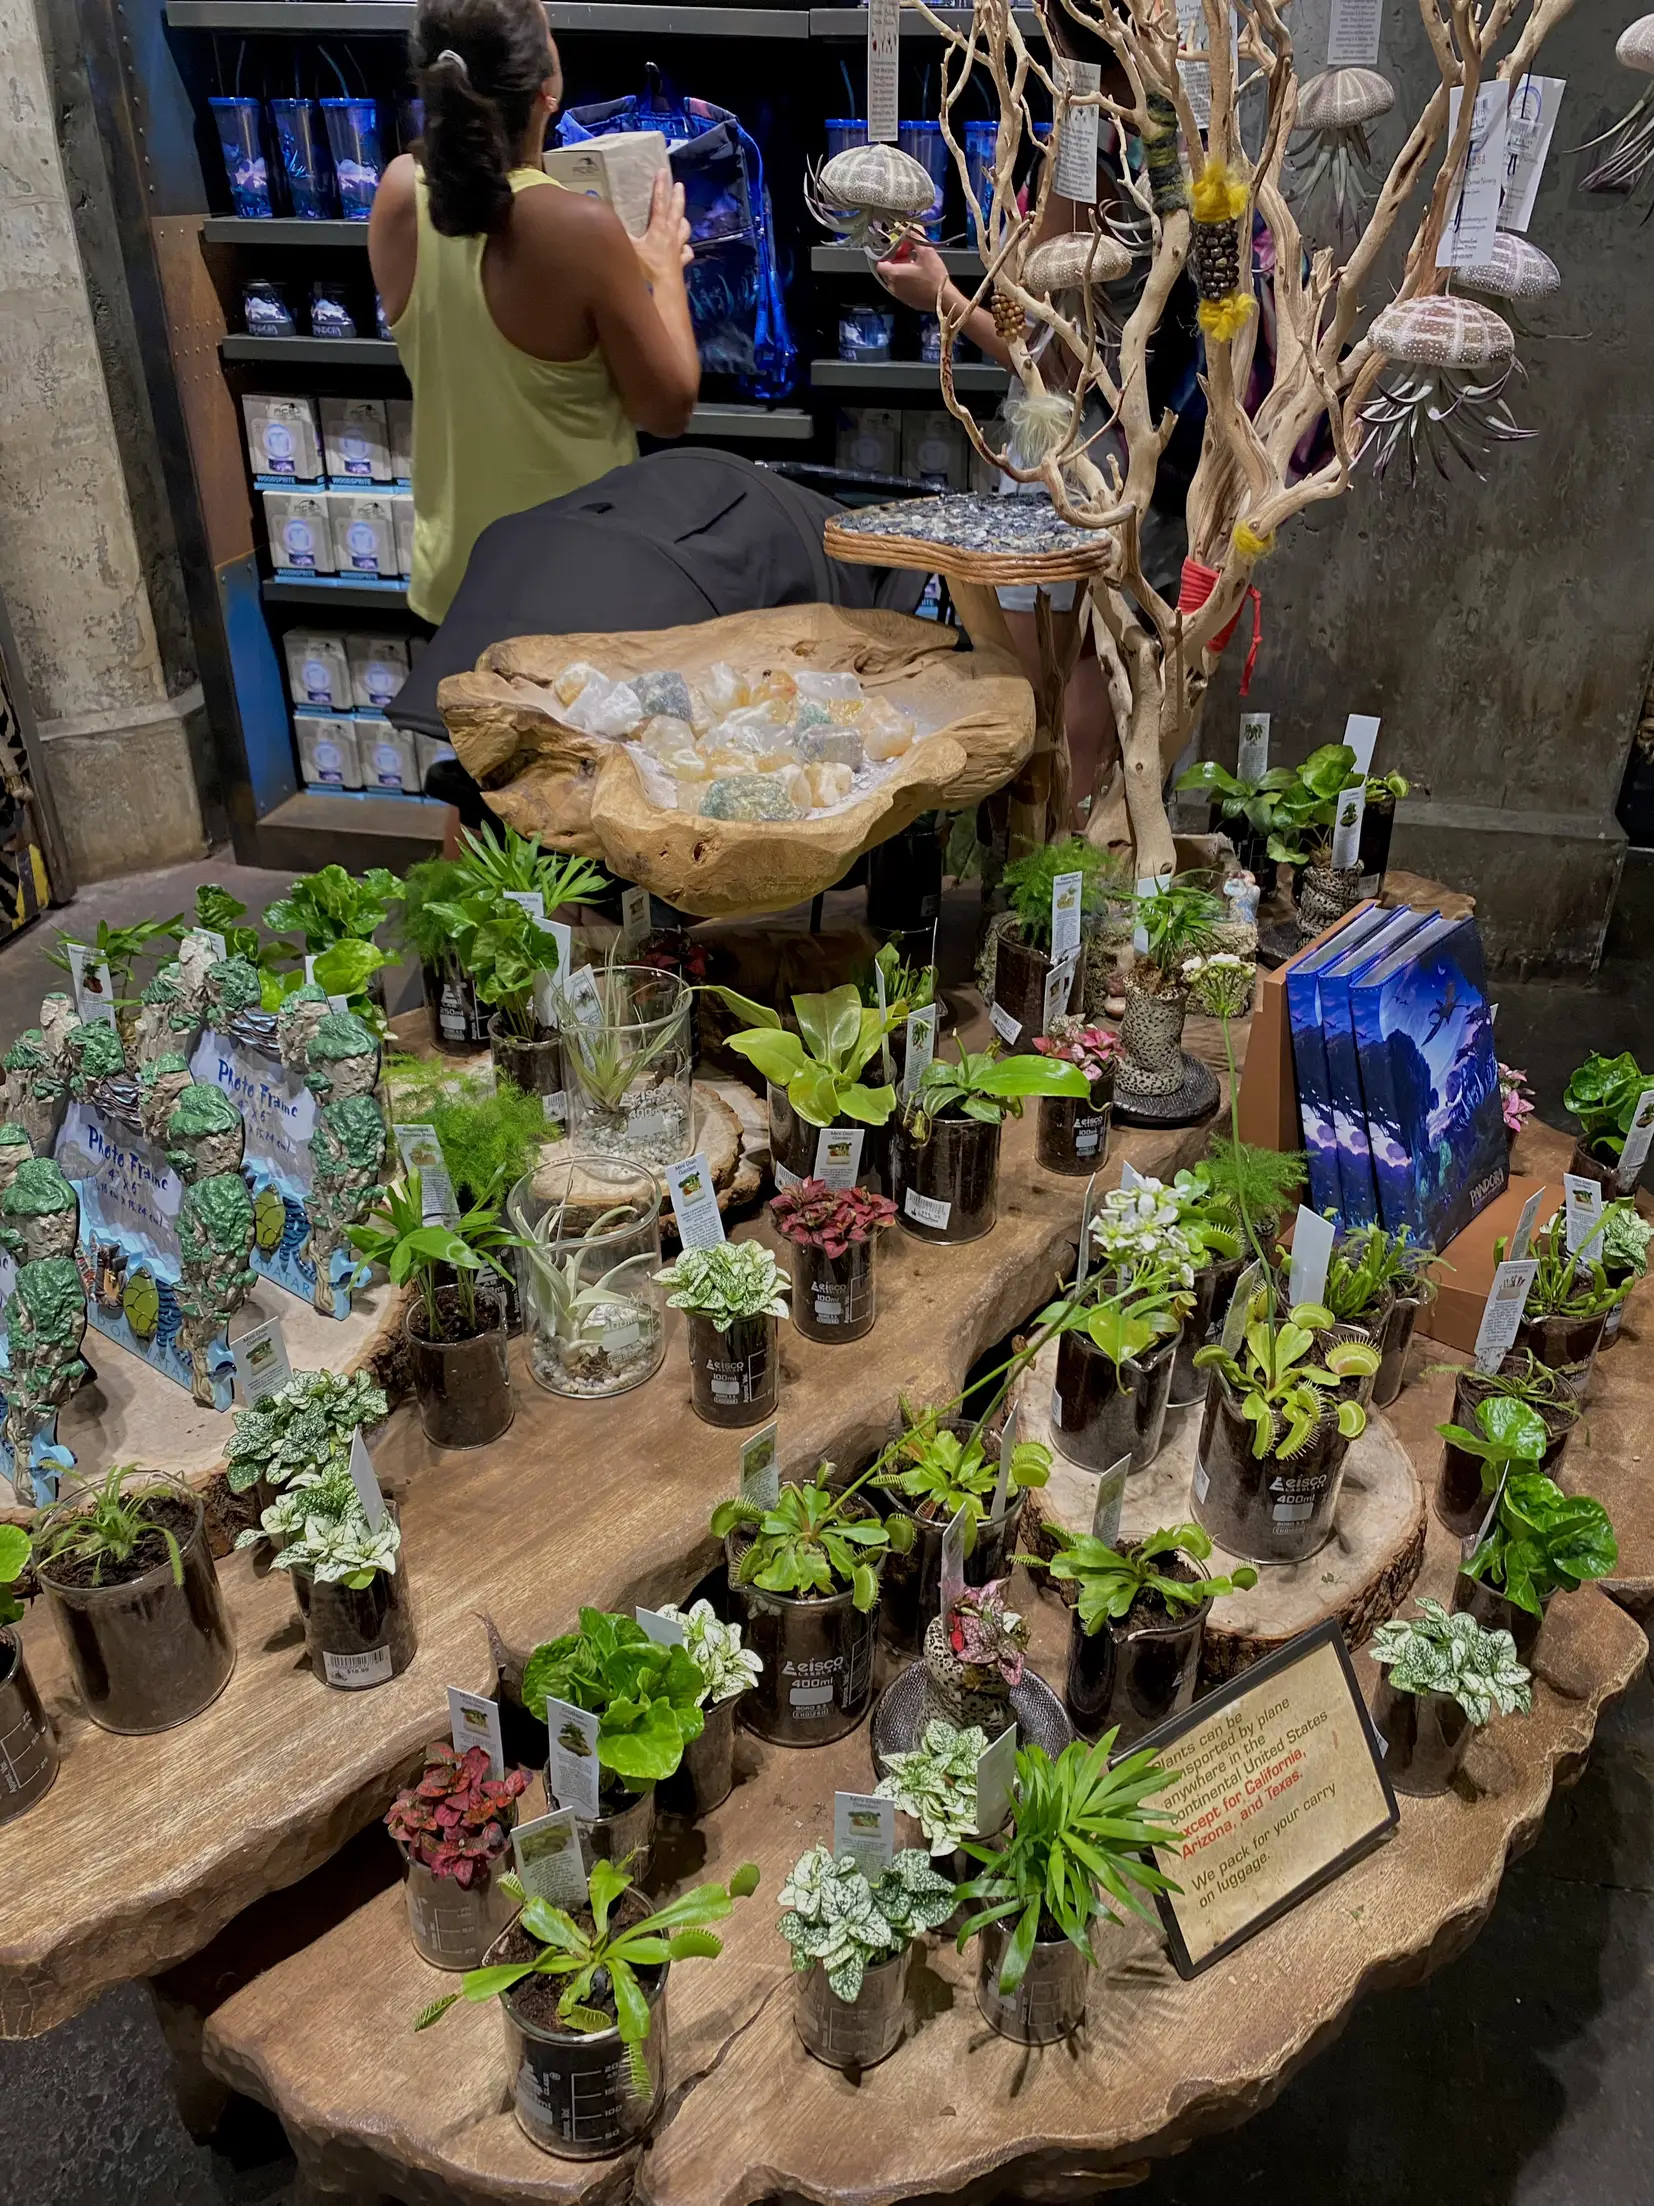  A table with a lot of plants on it.